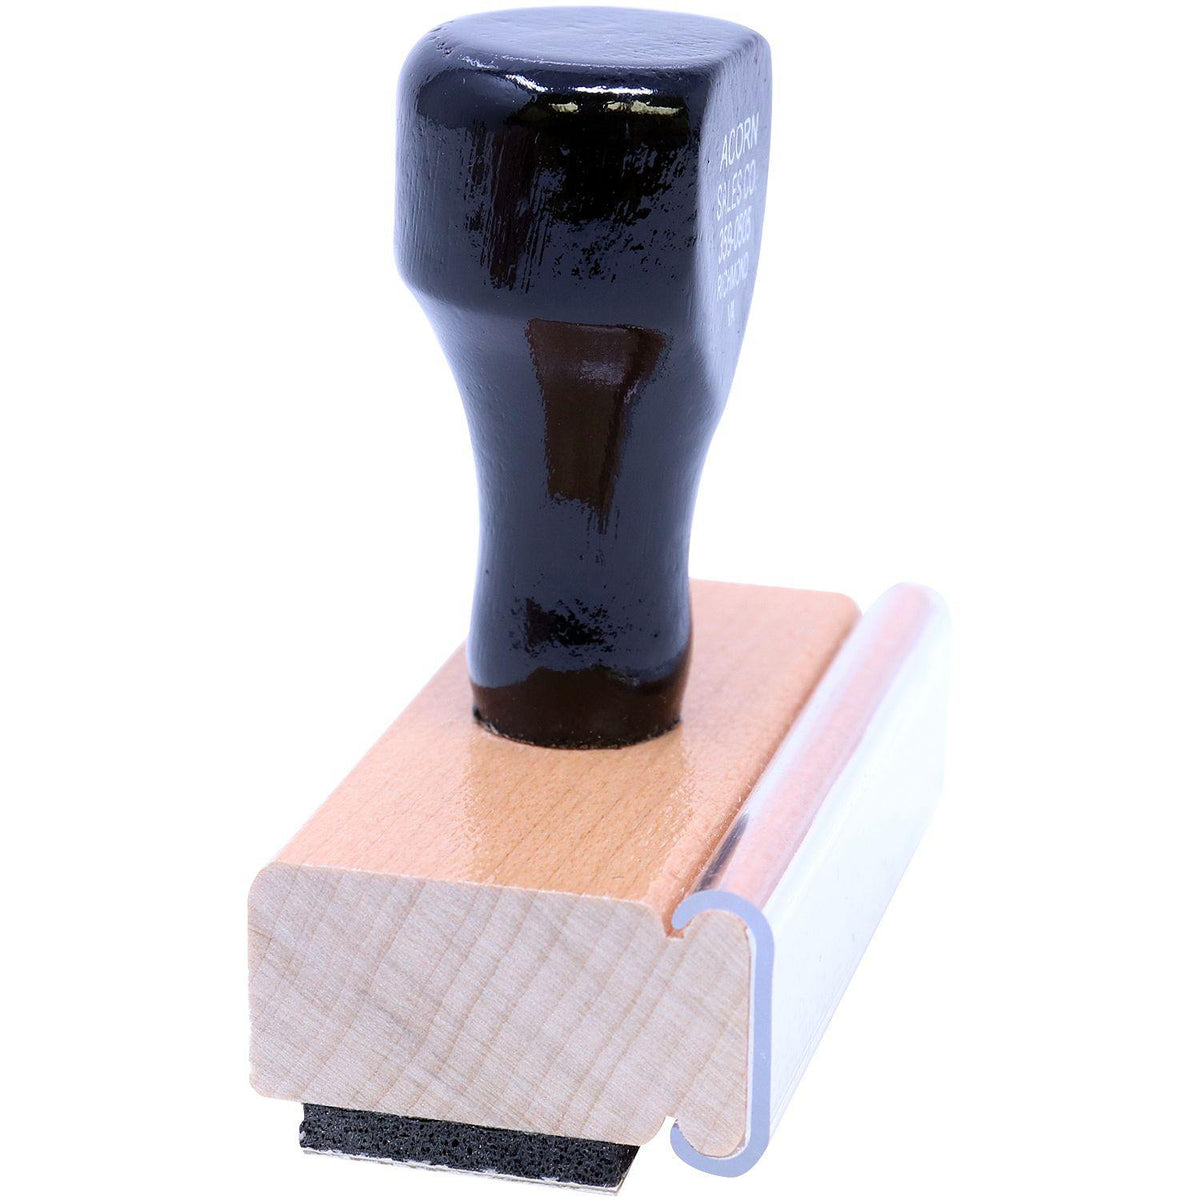 Side View of Large Por Avion Rubber Stamp at an Angle